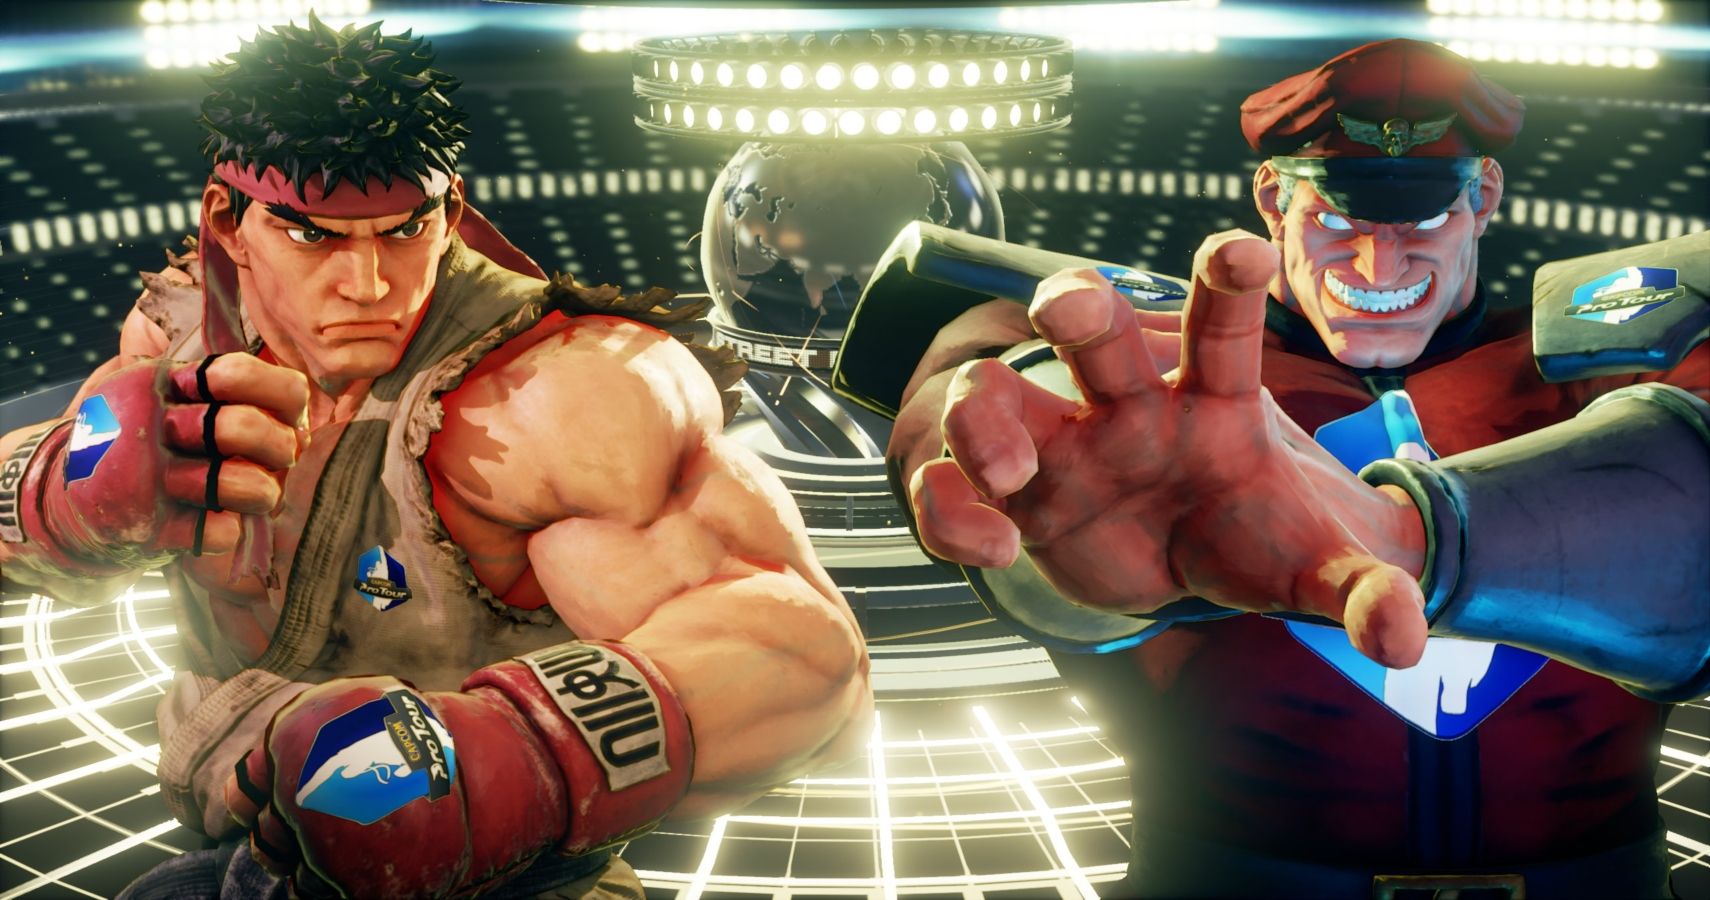 Street Fighter 5: Arcade Edition getting in-game ads - Polygon